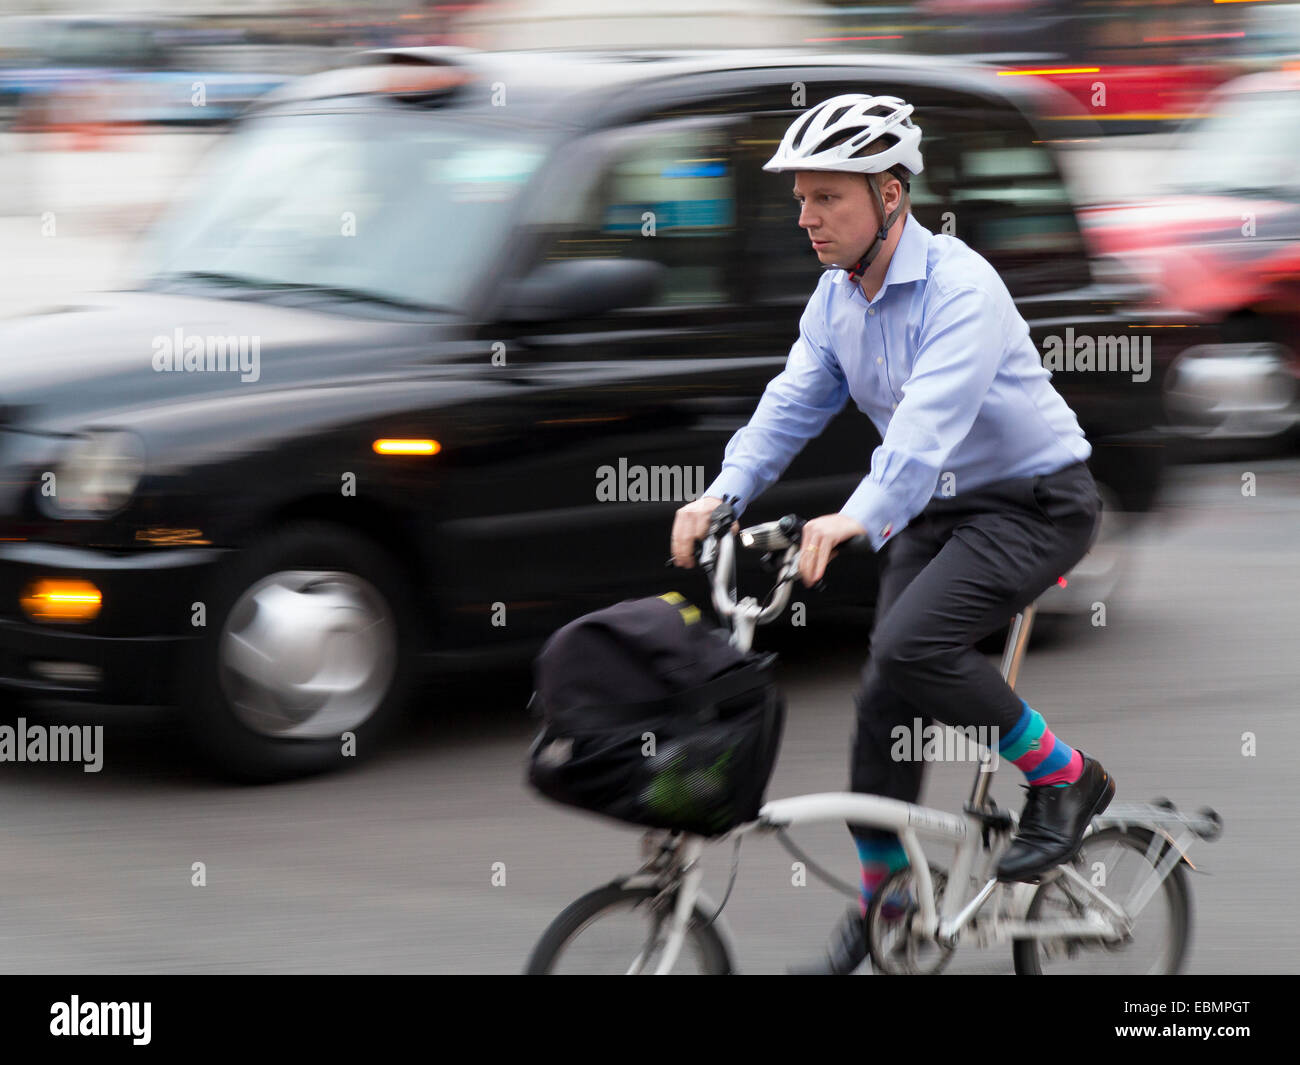 London, UK - October 23, 2014: A commuter cyclist wearing shirt and cufflinks negotiating the traffic of buses cars and taxis in Stock Photo